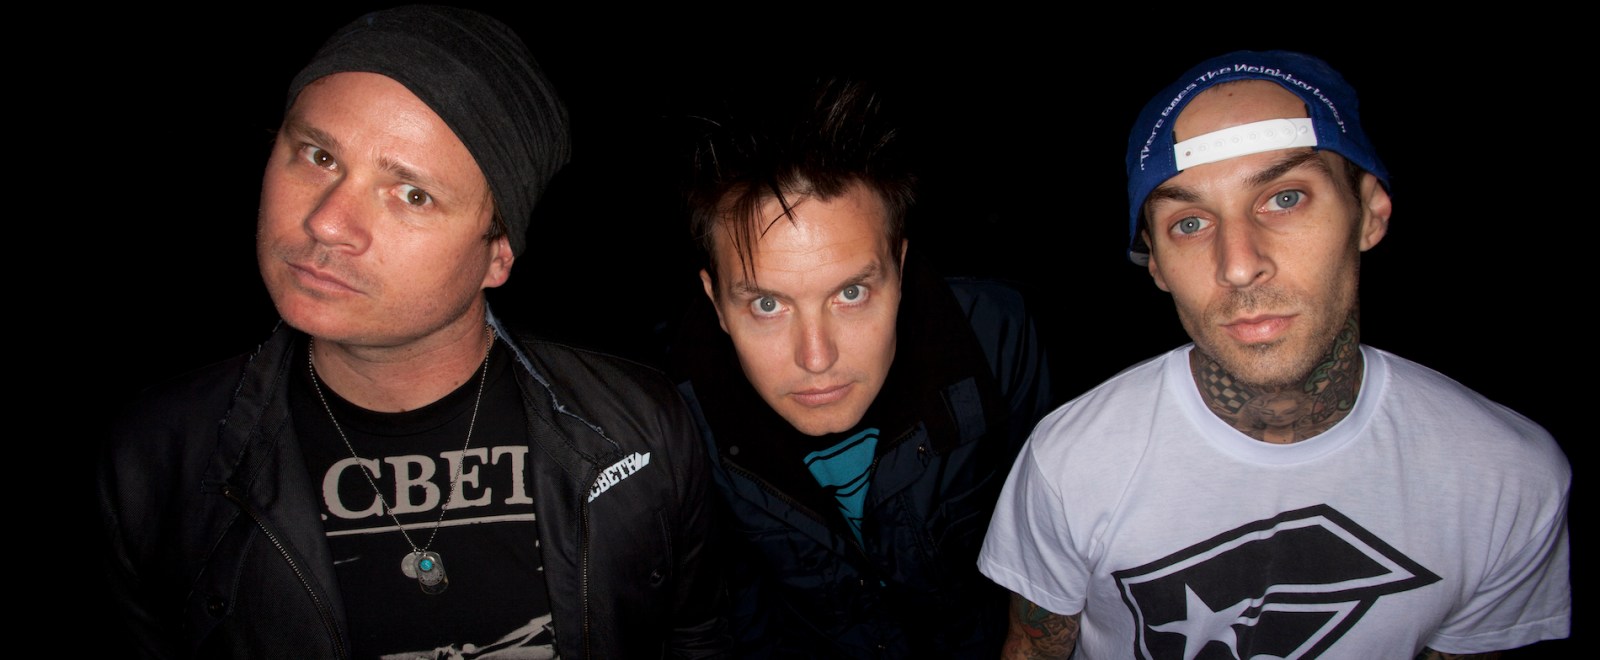 Blink-182's 'One More Time' Album Title, Explained